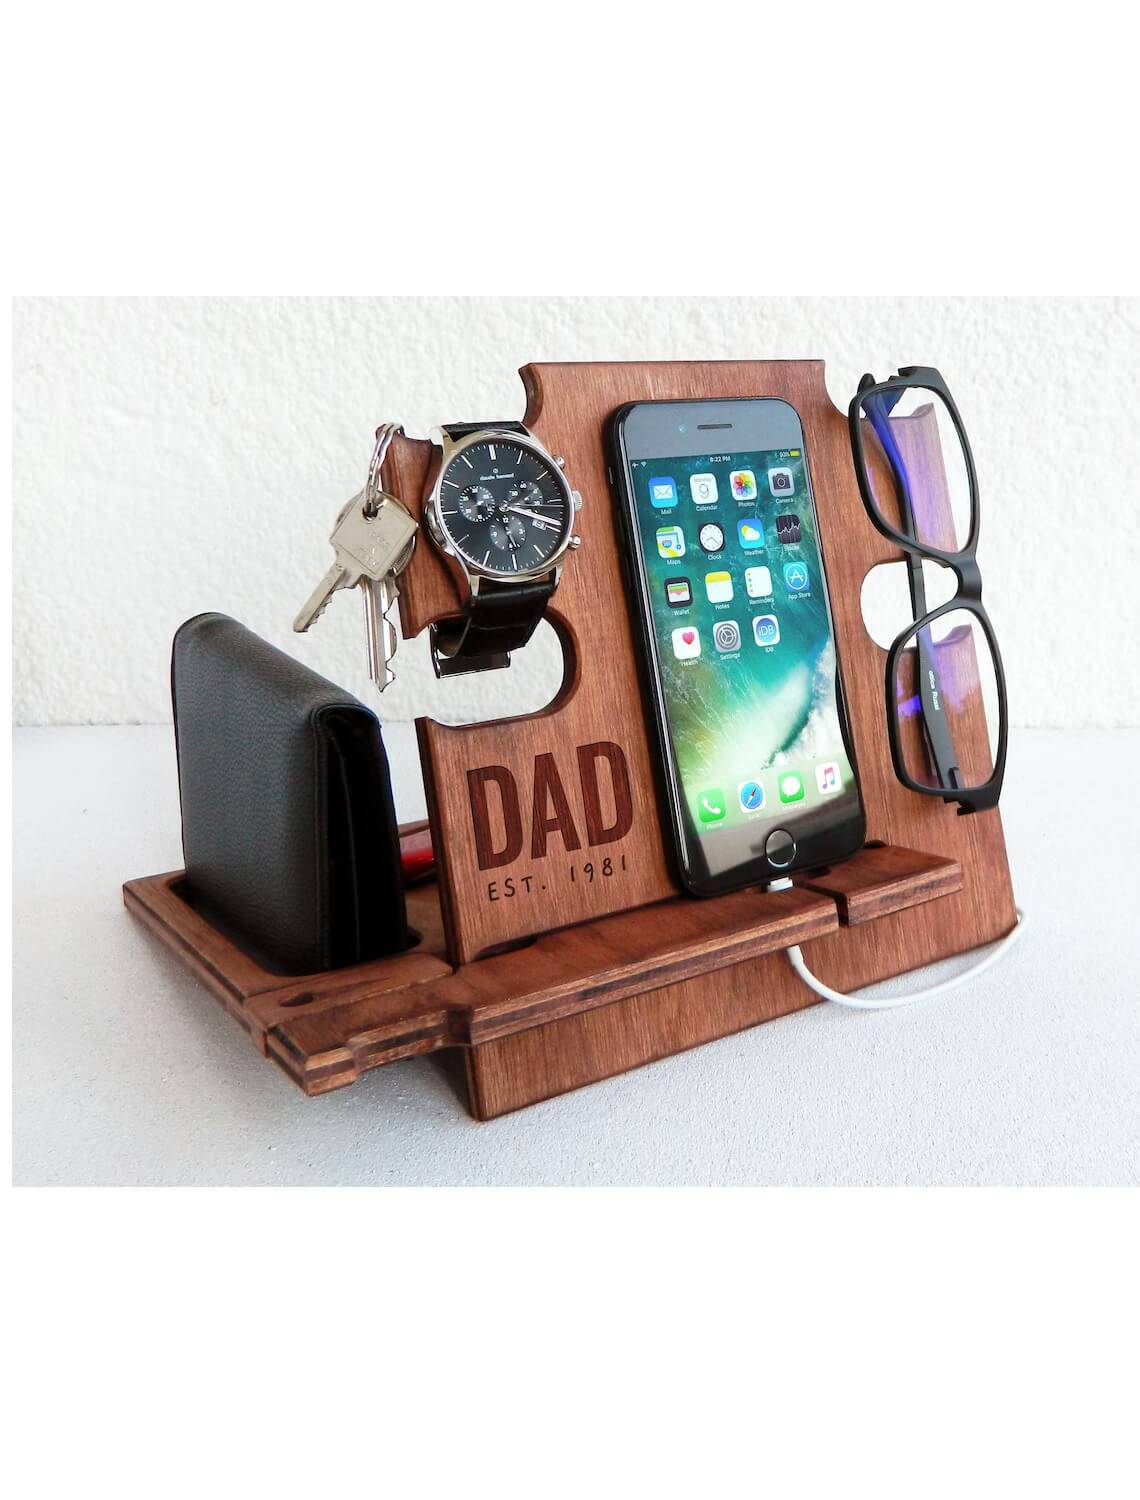 father's day gift organizer